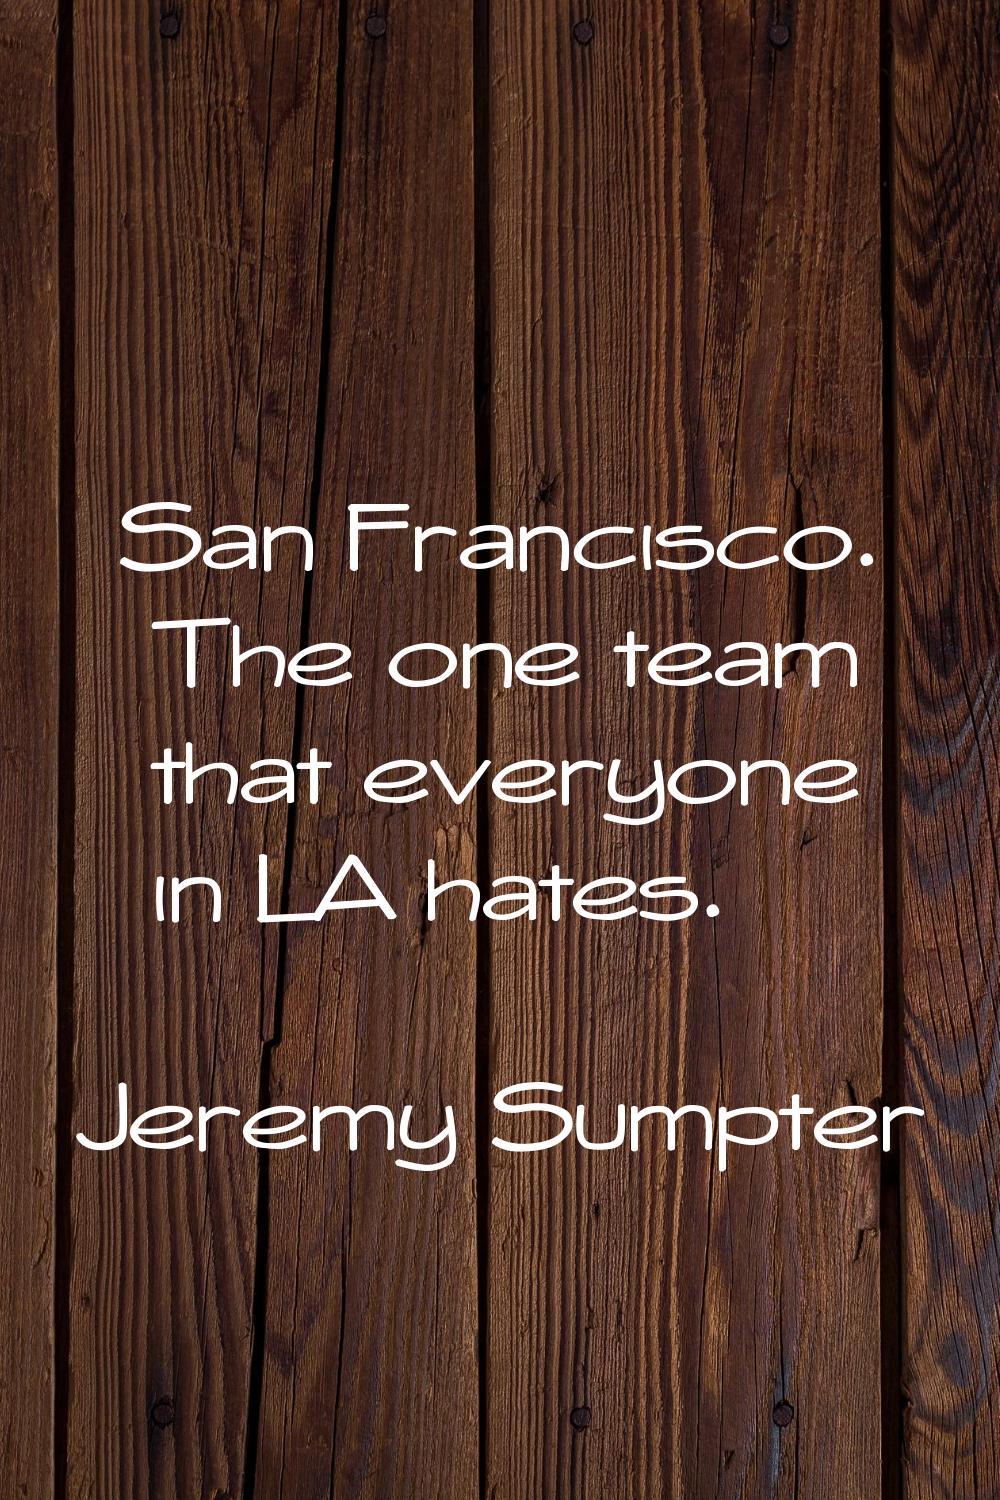 San Francisco. The one team that everyone in LA hates.